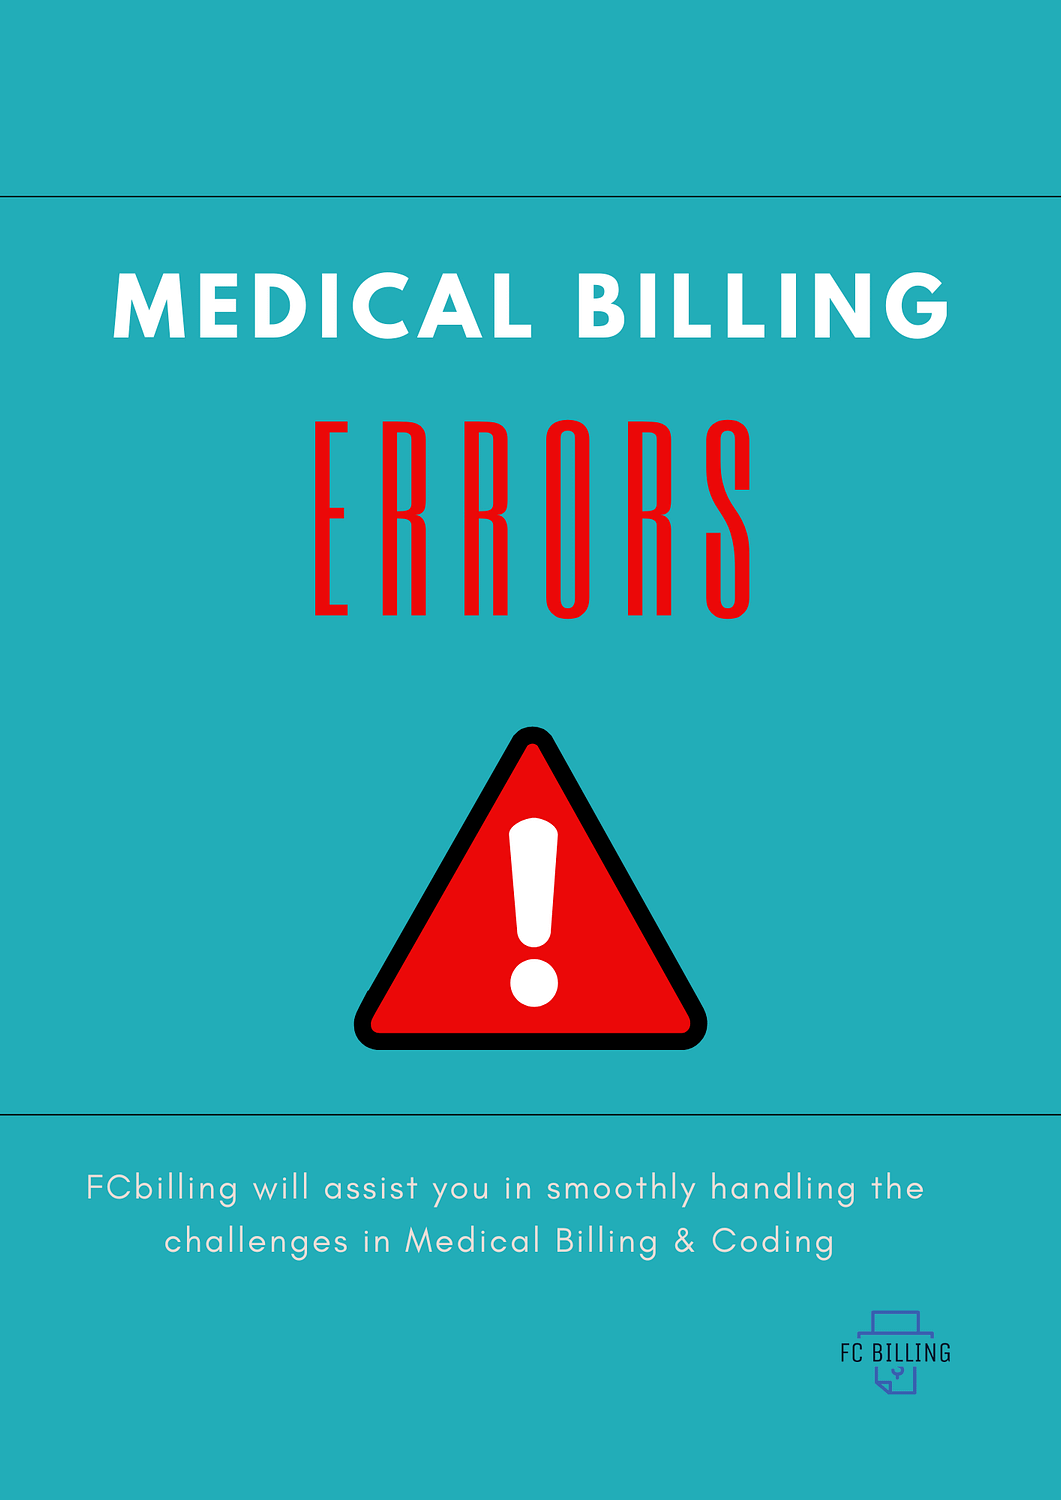 FCbilling will assist you in smoothly handling the challenges in Medical Billing and Coding